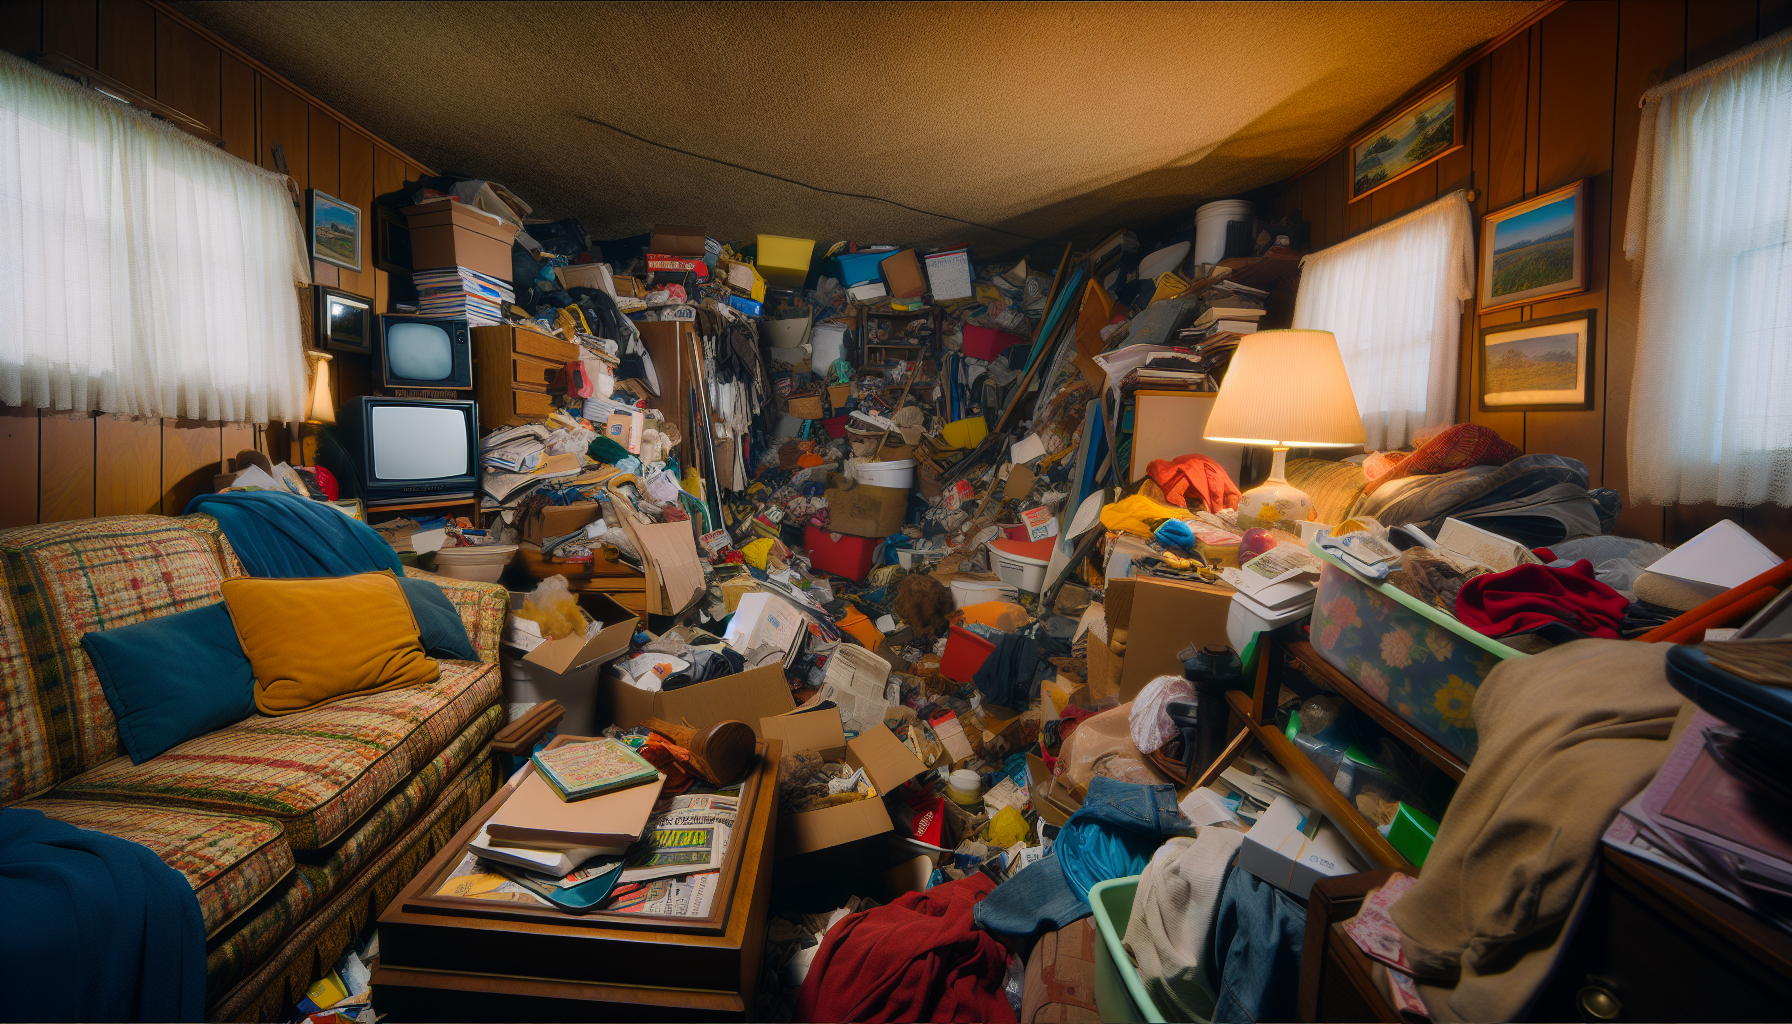 Photo of a cluttered living space with excessive accumulation of items